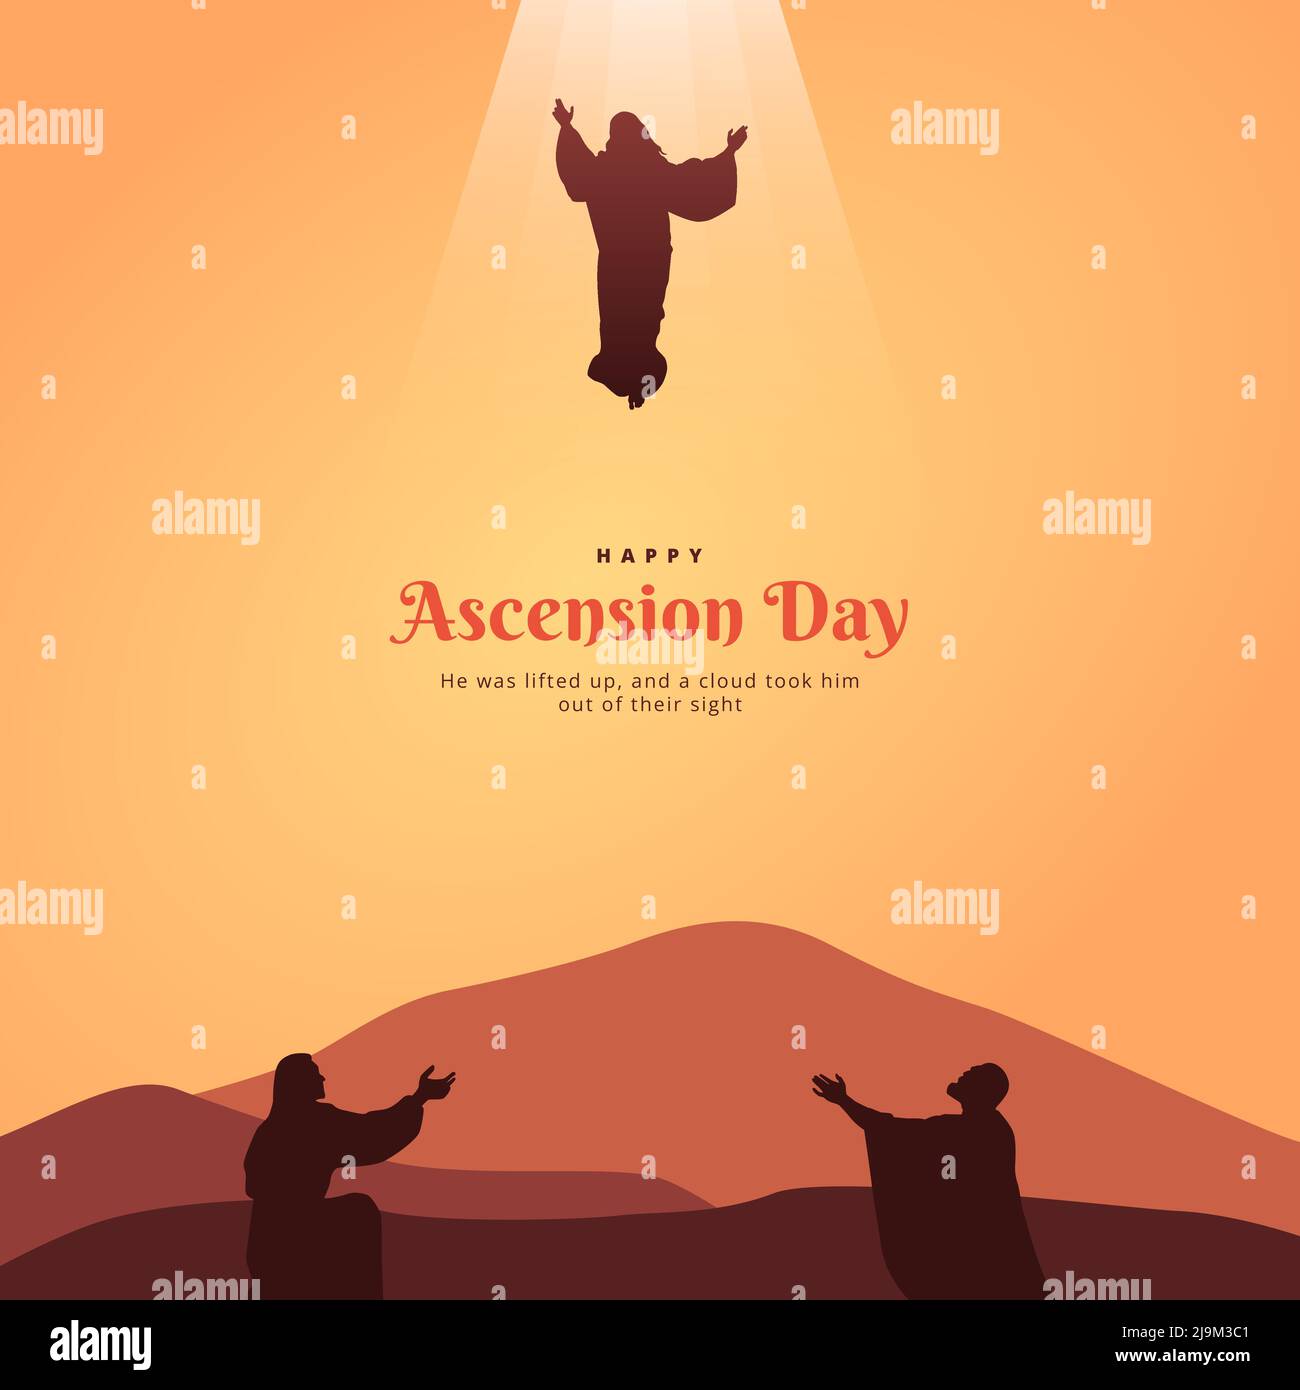 The Ascension Day of Jesus Christ Vector Illustration. Biblical silhouette illustration series Stock Vector